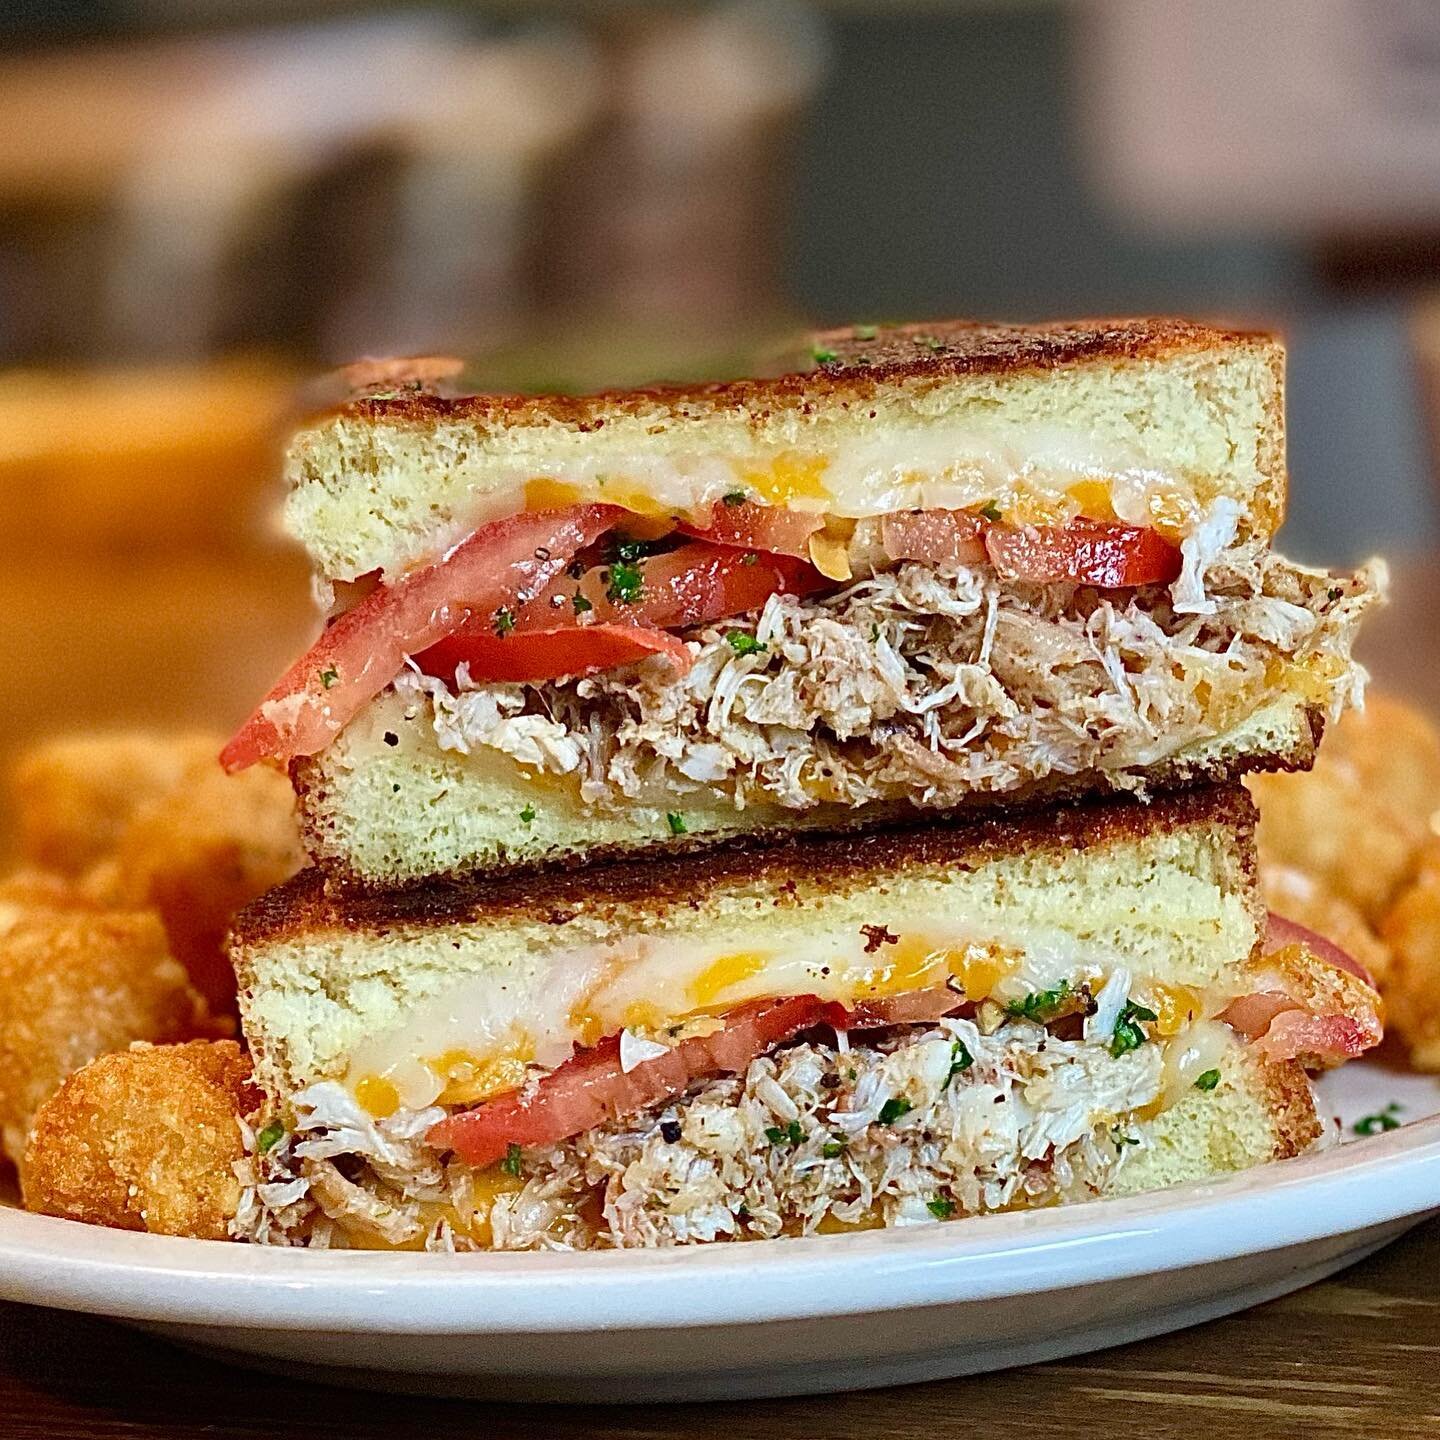 215-426-2665 &bull; OPEN TODAY AT 4pm! (outdoor dining available‼️) &bull; Call to order takeout ☎️ &bull; Full Menu in our highlights! QUIZZO AT 7!! 🧠 
&bull;
&bull;
Today&rsquo;s Special:
-Cajun Crab Melt with Colby Jack Cheddar and Roma Tomato on